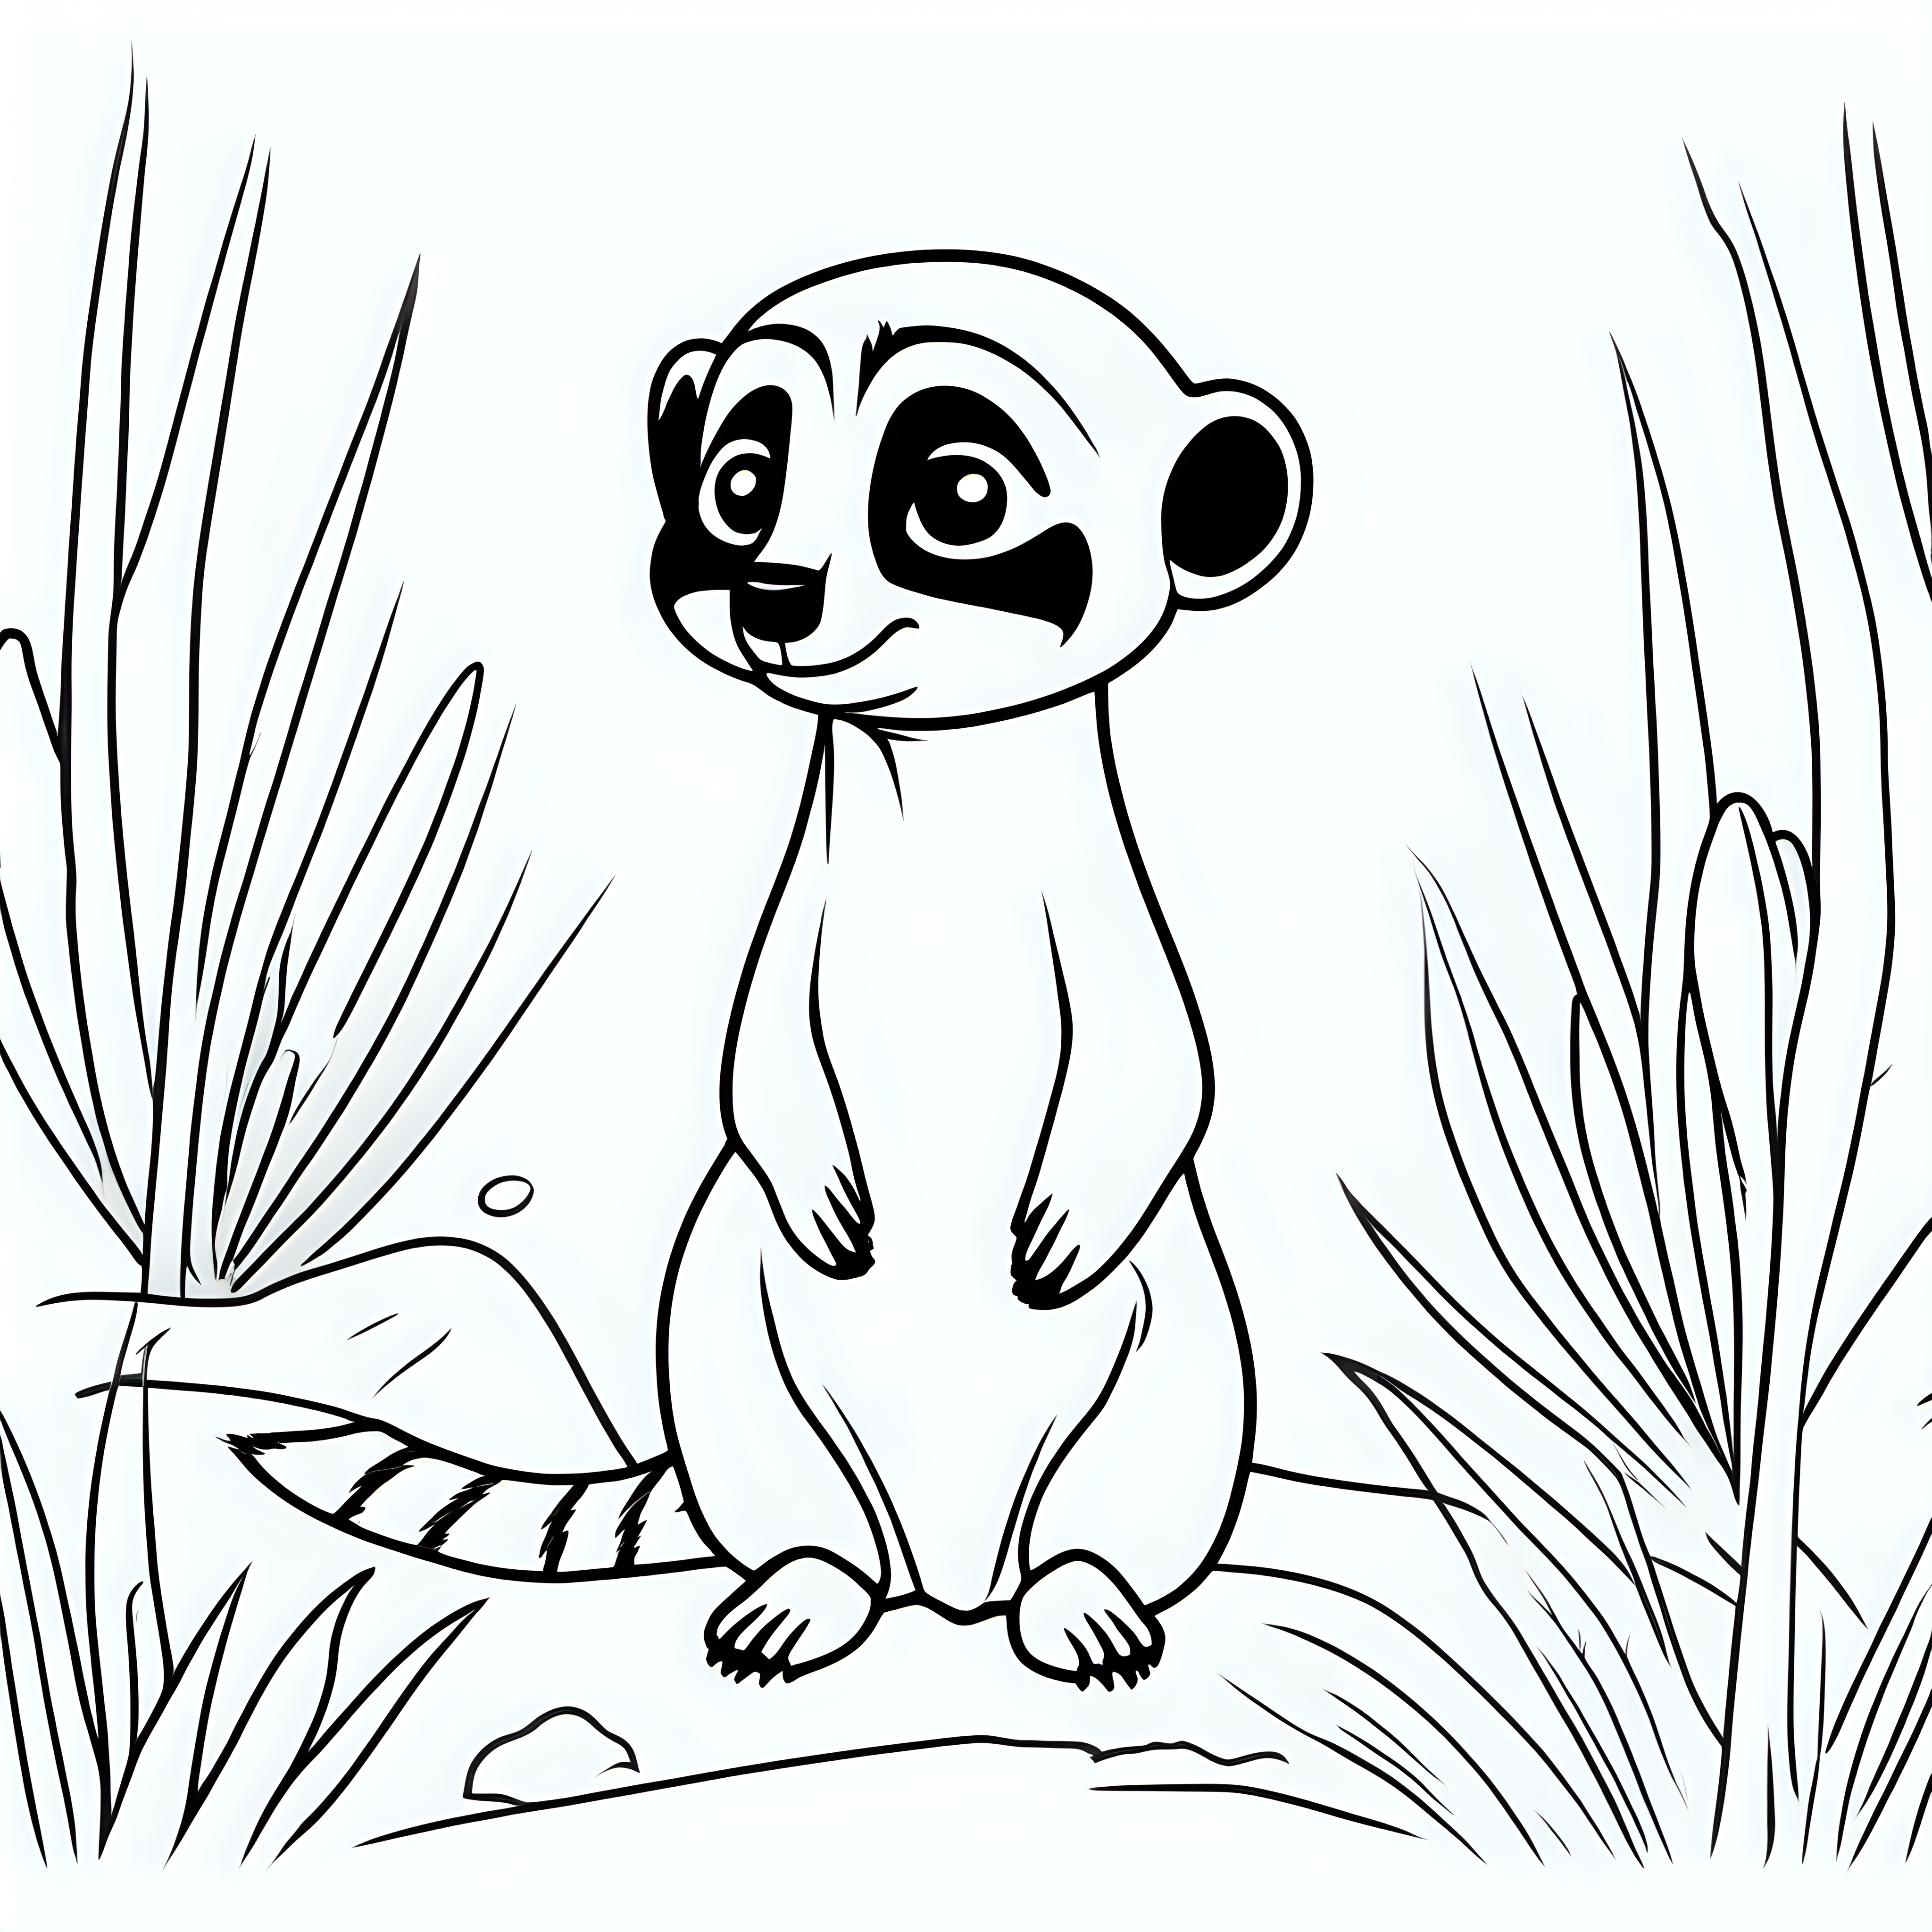 draw a cute meerkat with only the outline